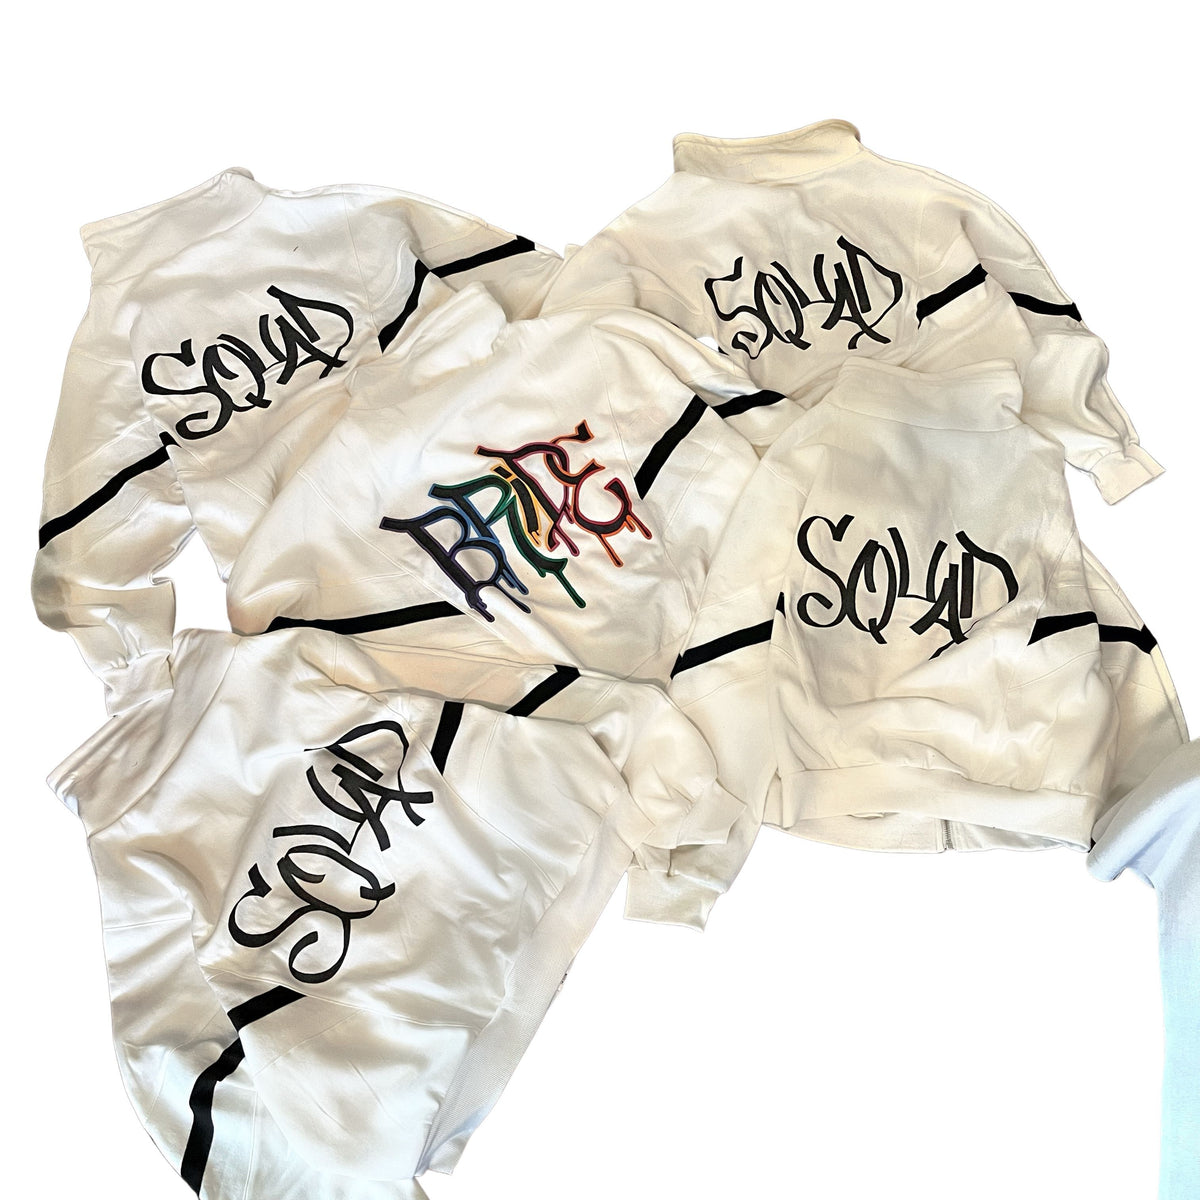 'BRIDE N SQUAD' PAINTED SWEAT JACKETS